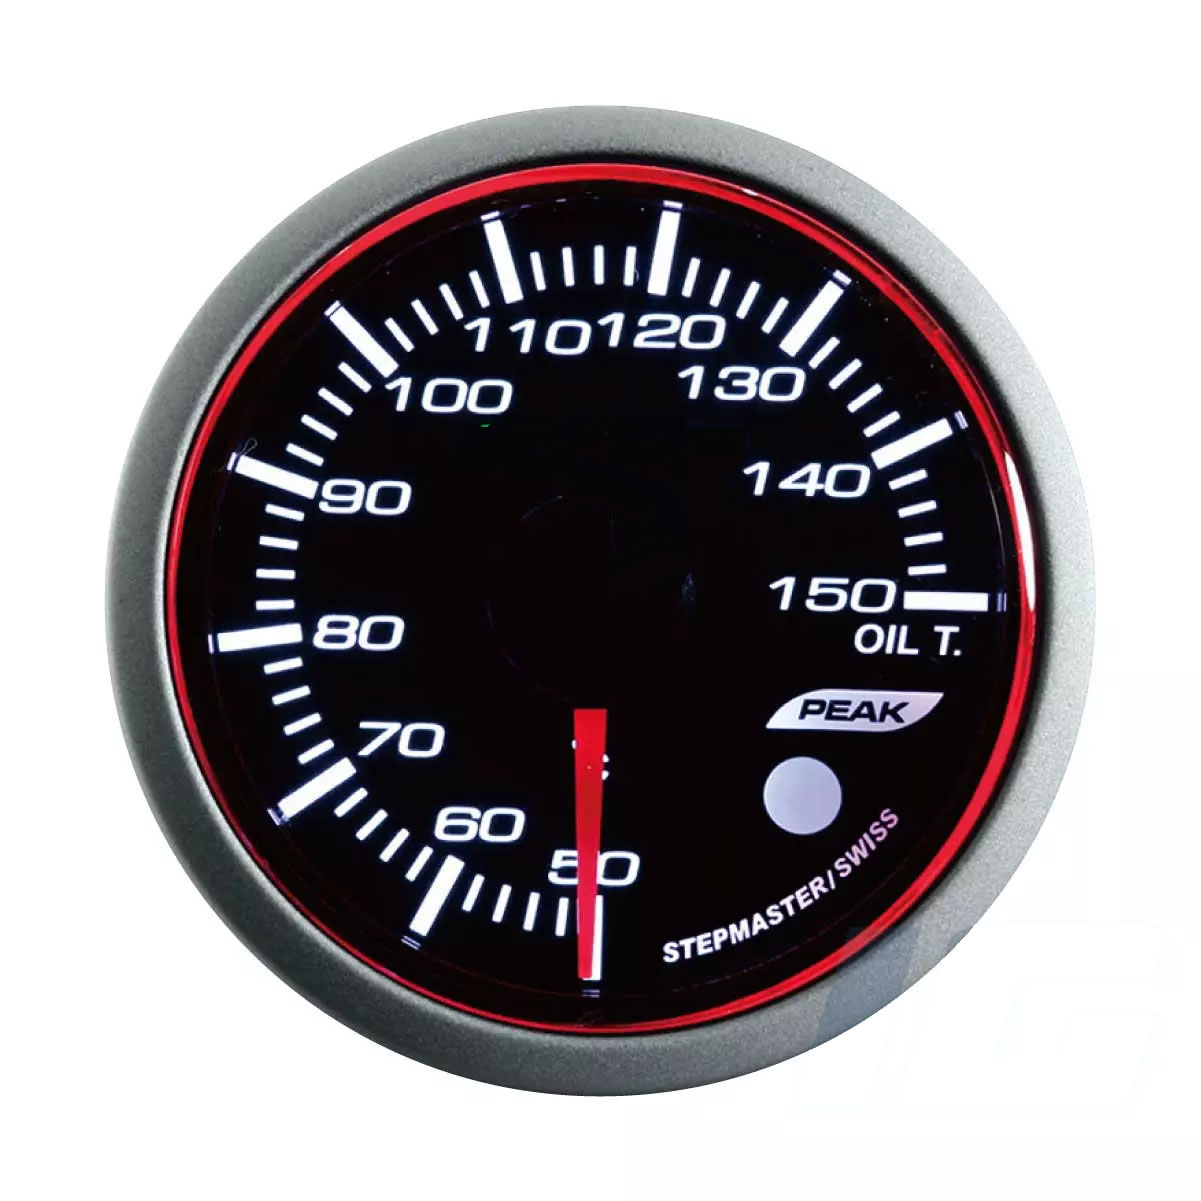 60mm White and Blue and Amber LED Performance Car Gauges - Oil Temp Gauge With Sensor and Warning and Peak For Your Sport Racing Car